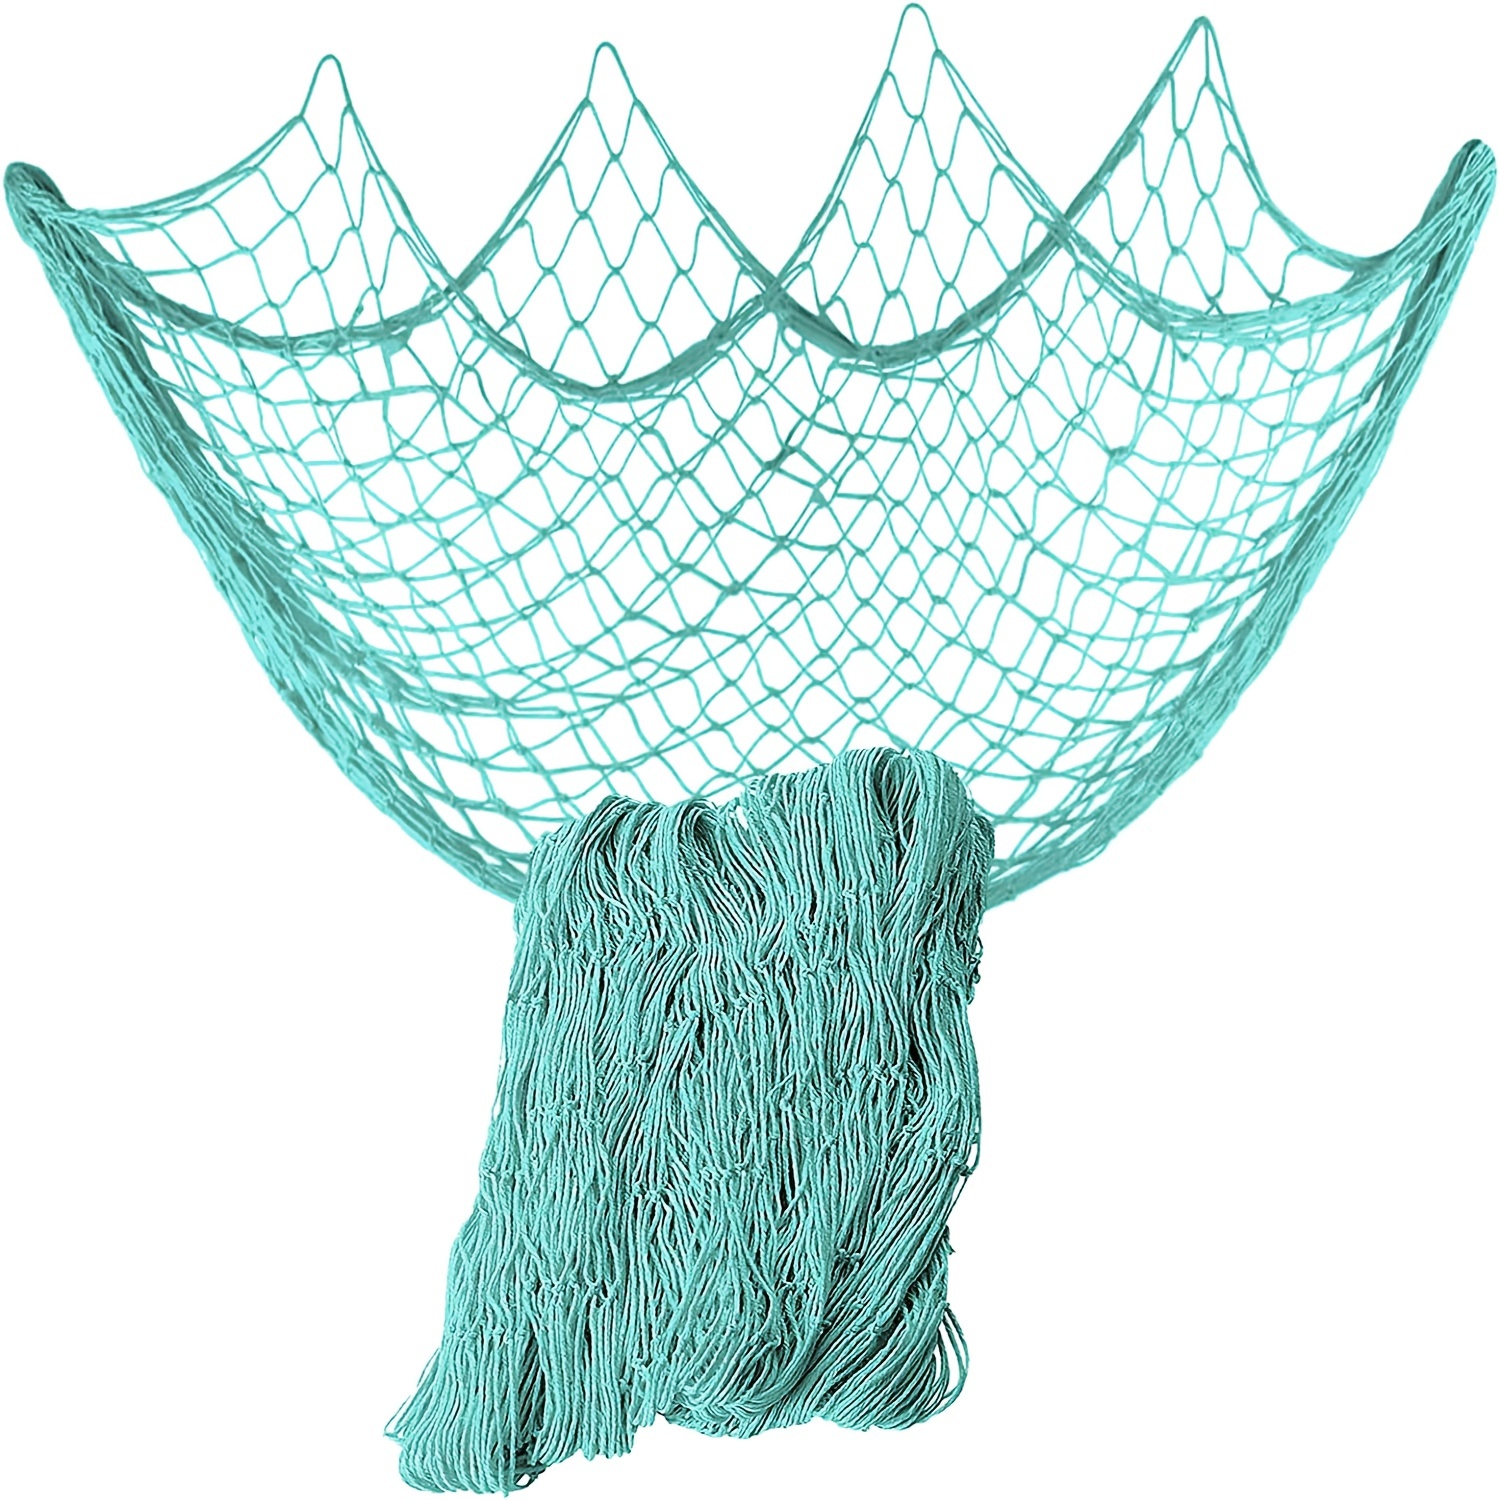  79 x 59 inch Nature Fish Net Wall Decoration with